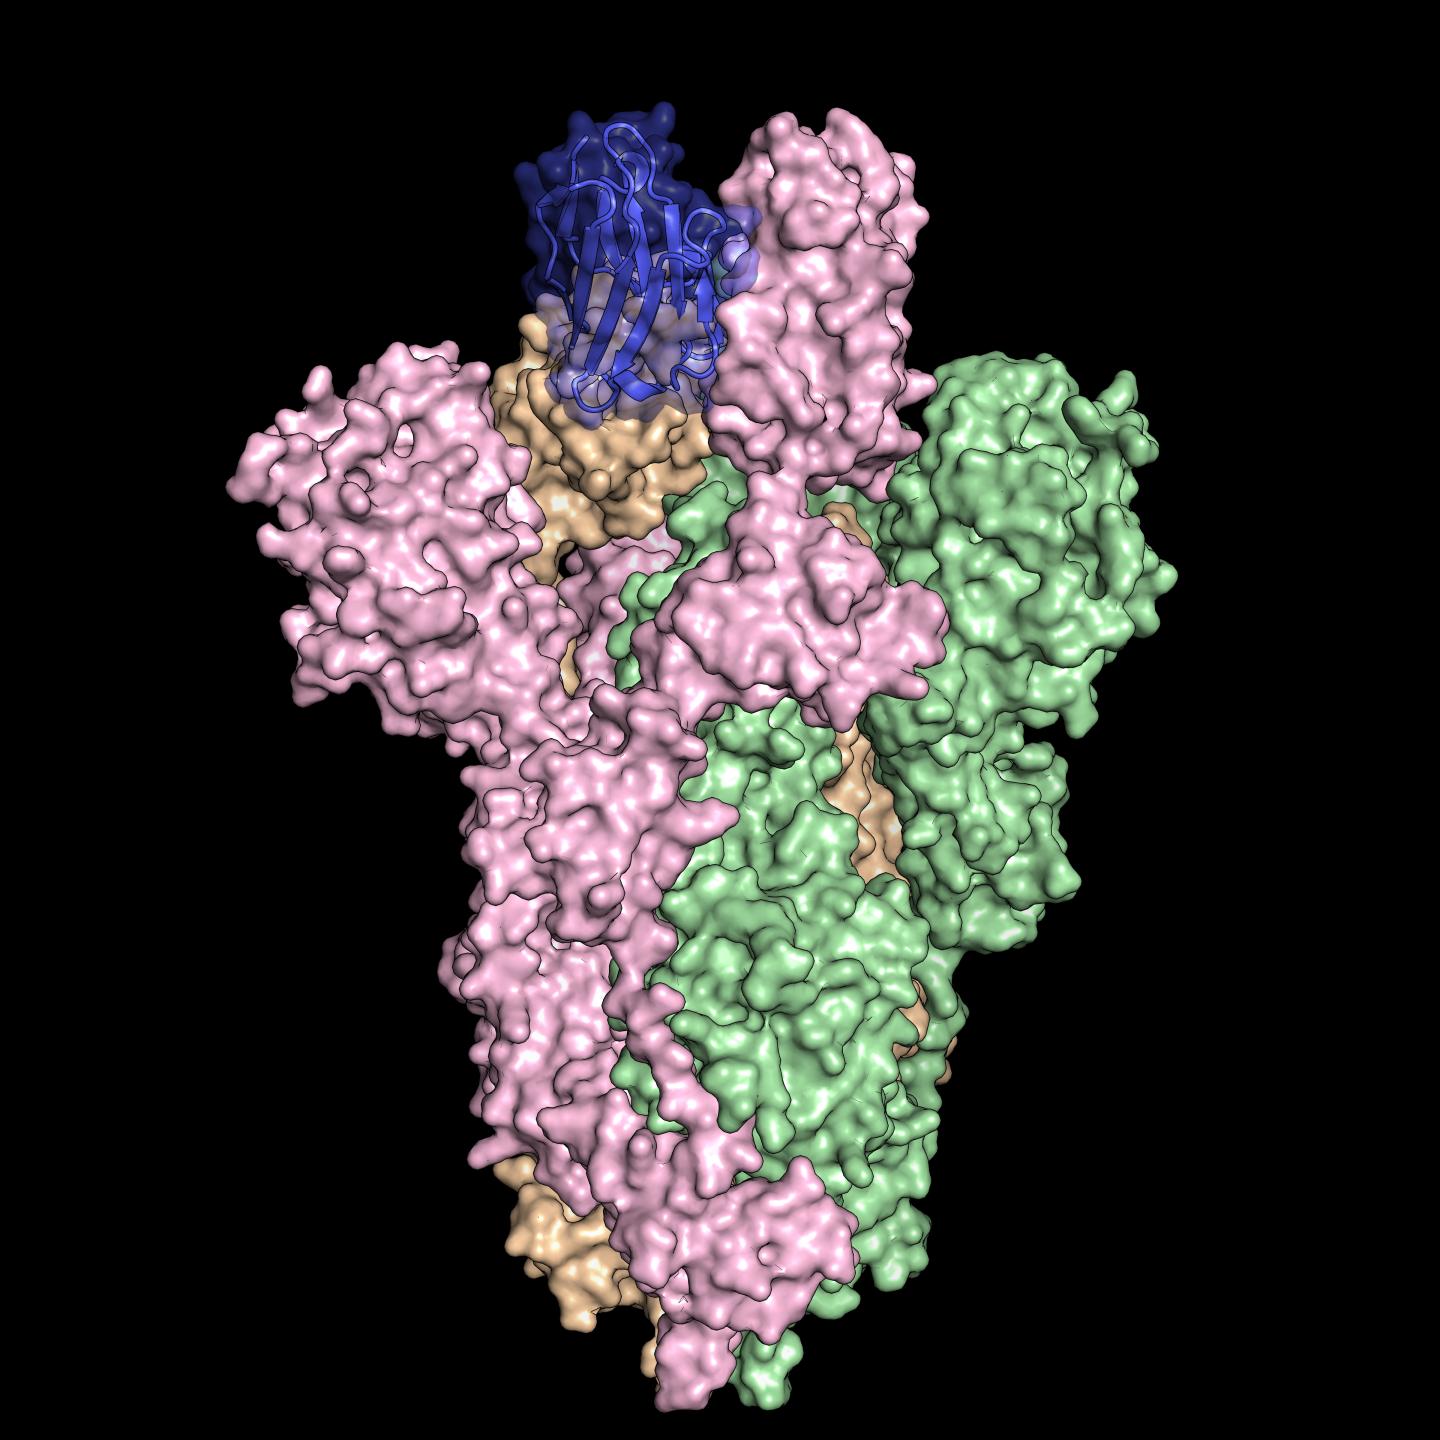 Antibody Bound to the Spike Protein from SARS-CoV-2